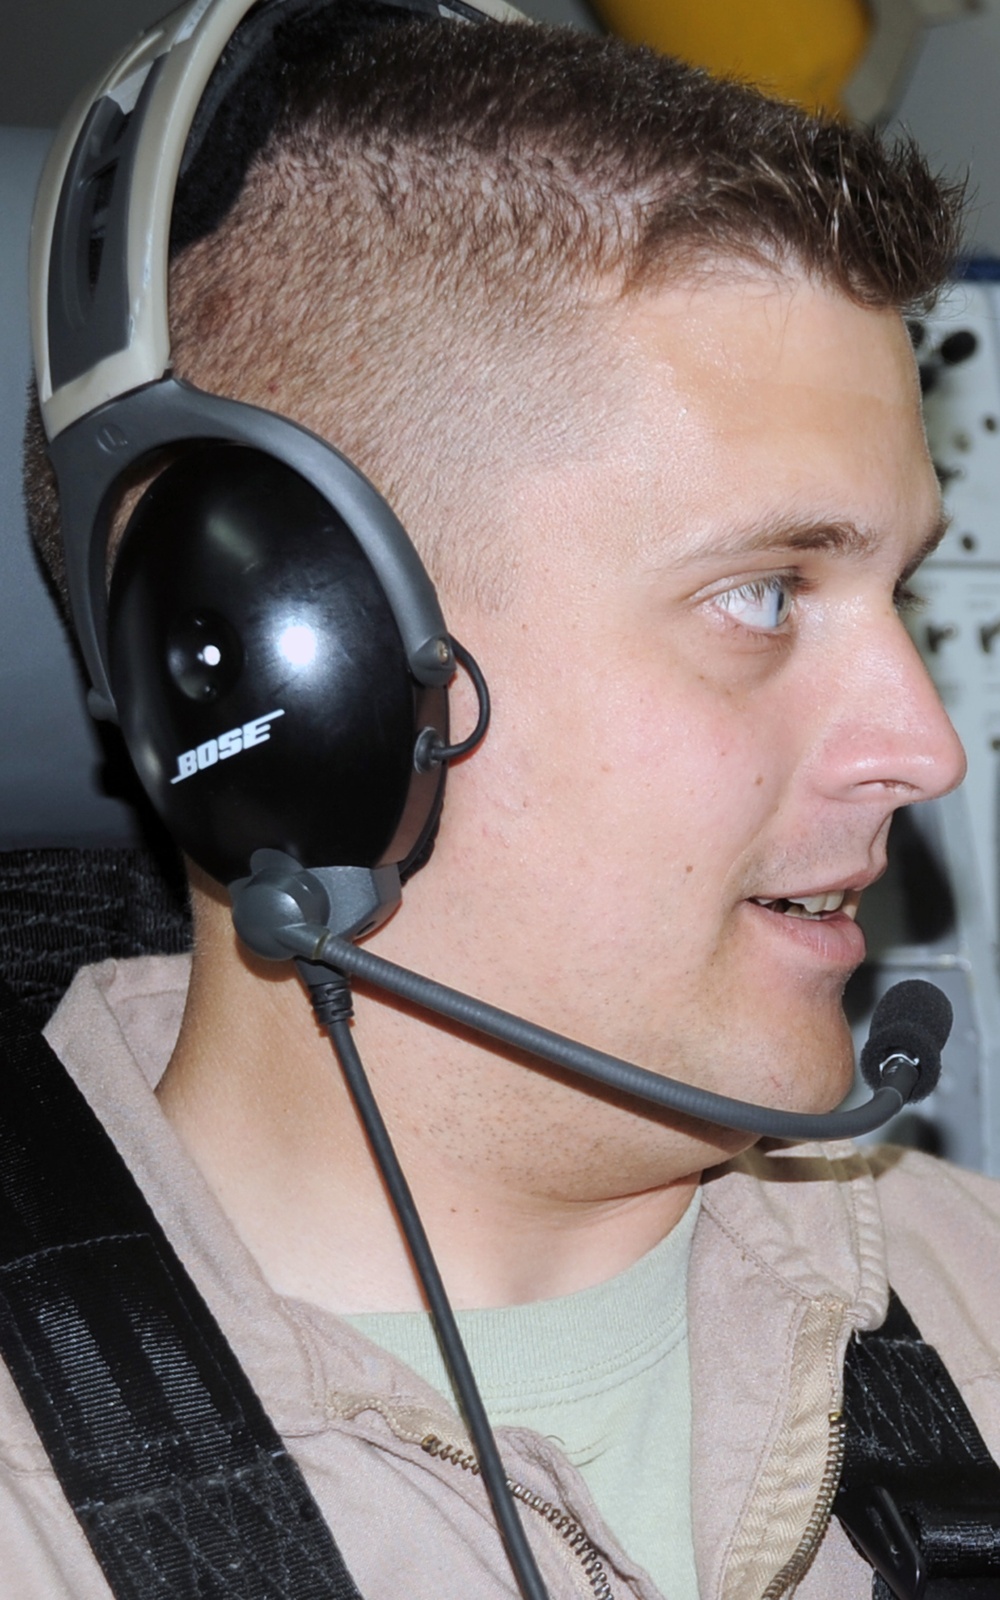 Tinker Captain, Bethlehem Native, Serves As Air Weapons Officer on AWACS Combat Air Missions in Southwest Asia